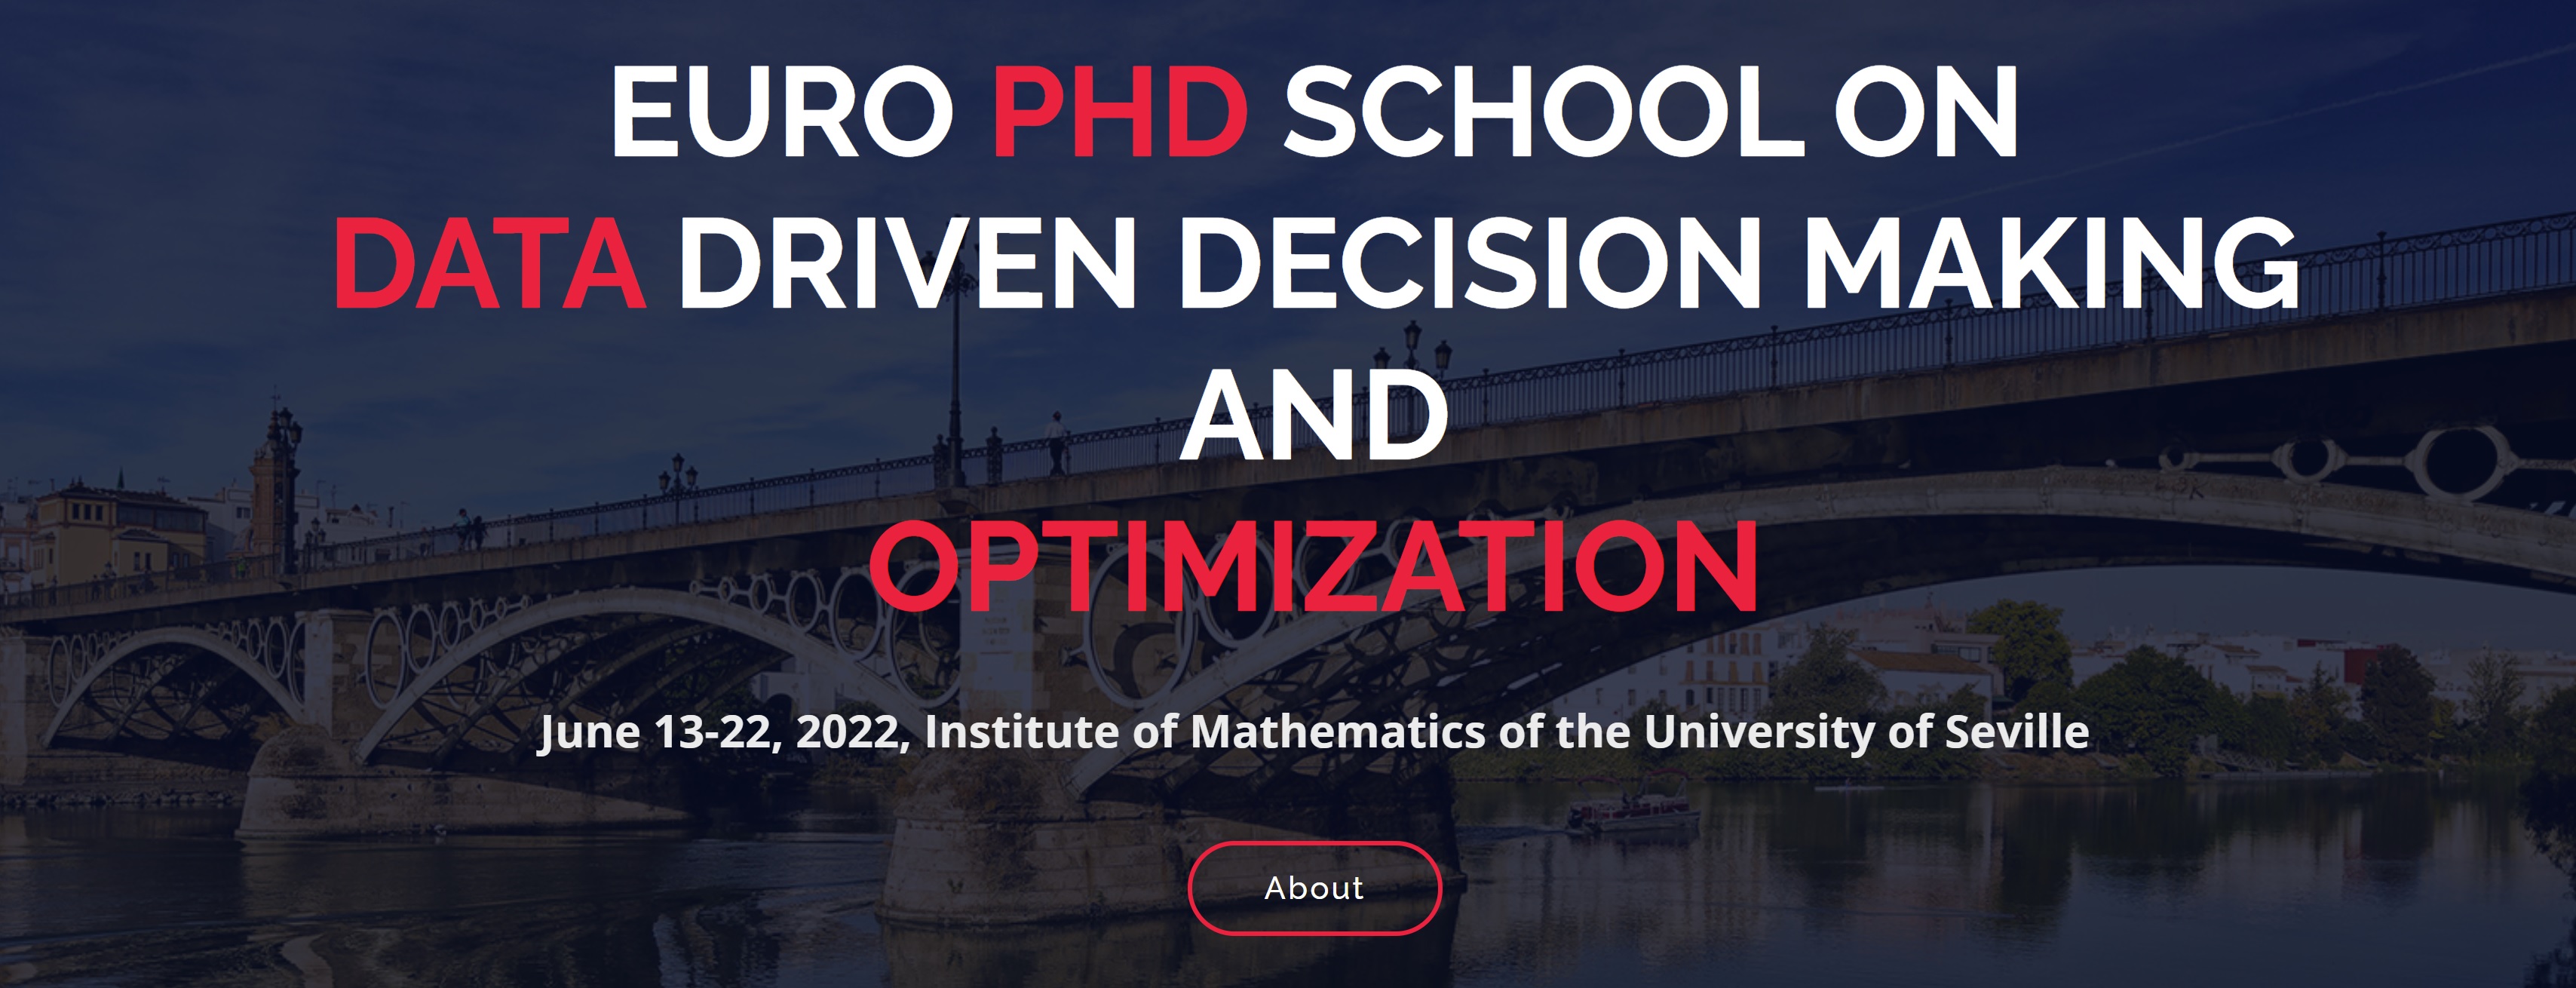 EURO PhD Summer School on Data Driven Decision Making and Optimization, June 13-22, 2022, Seville, Spain